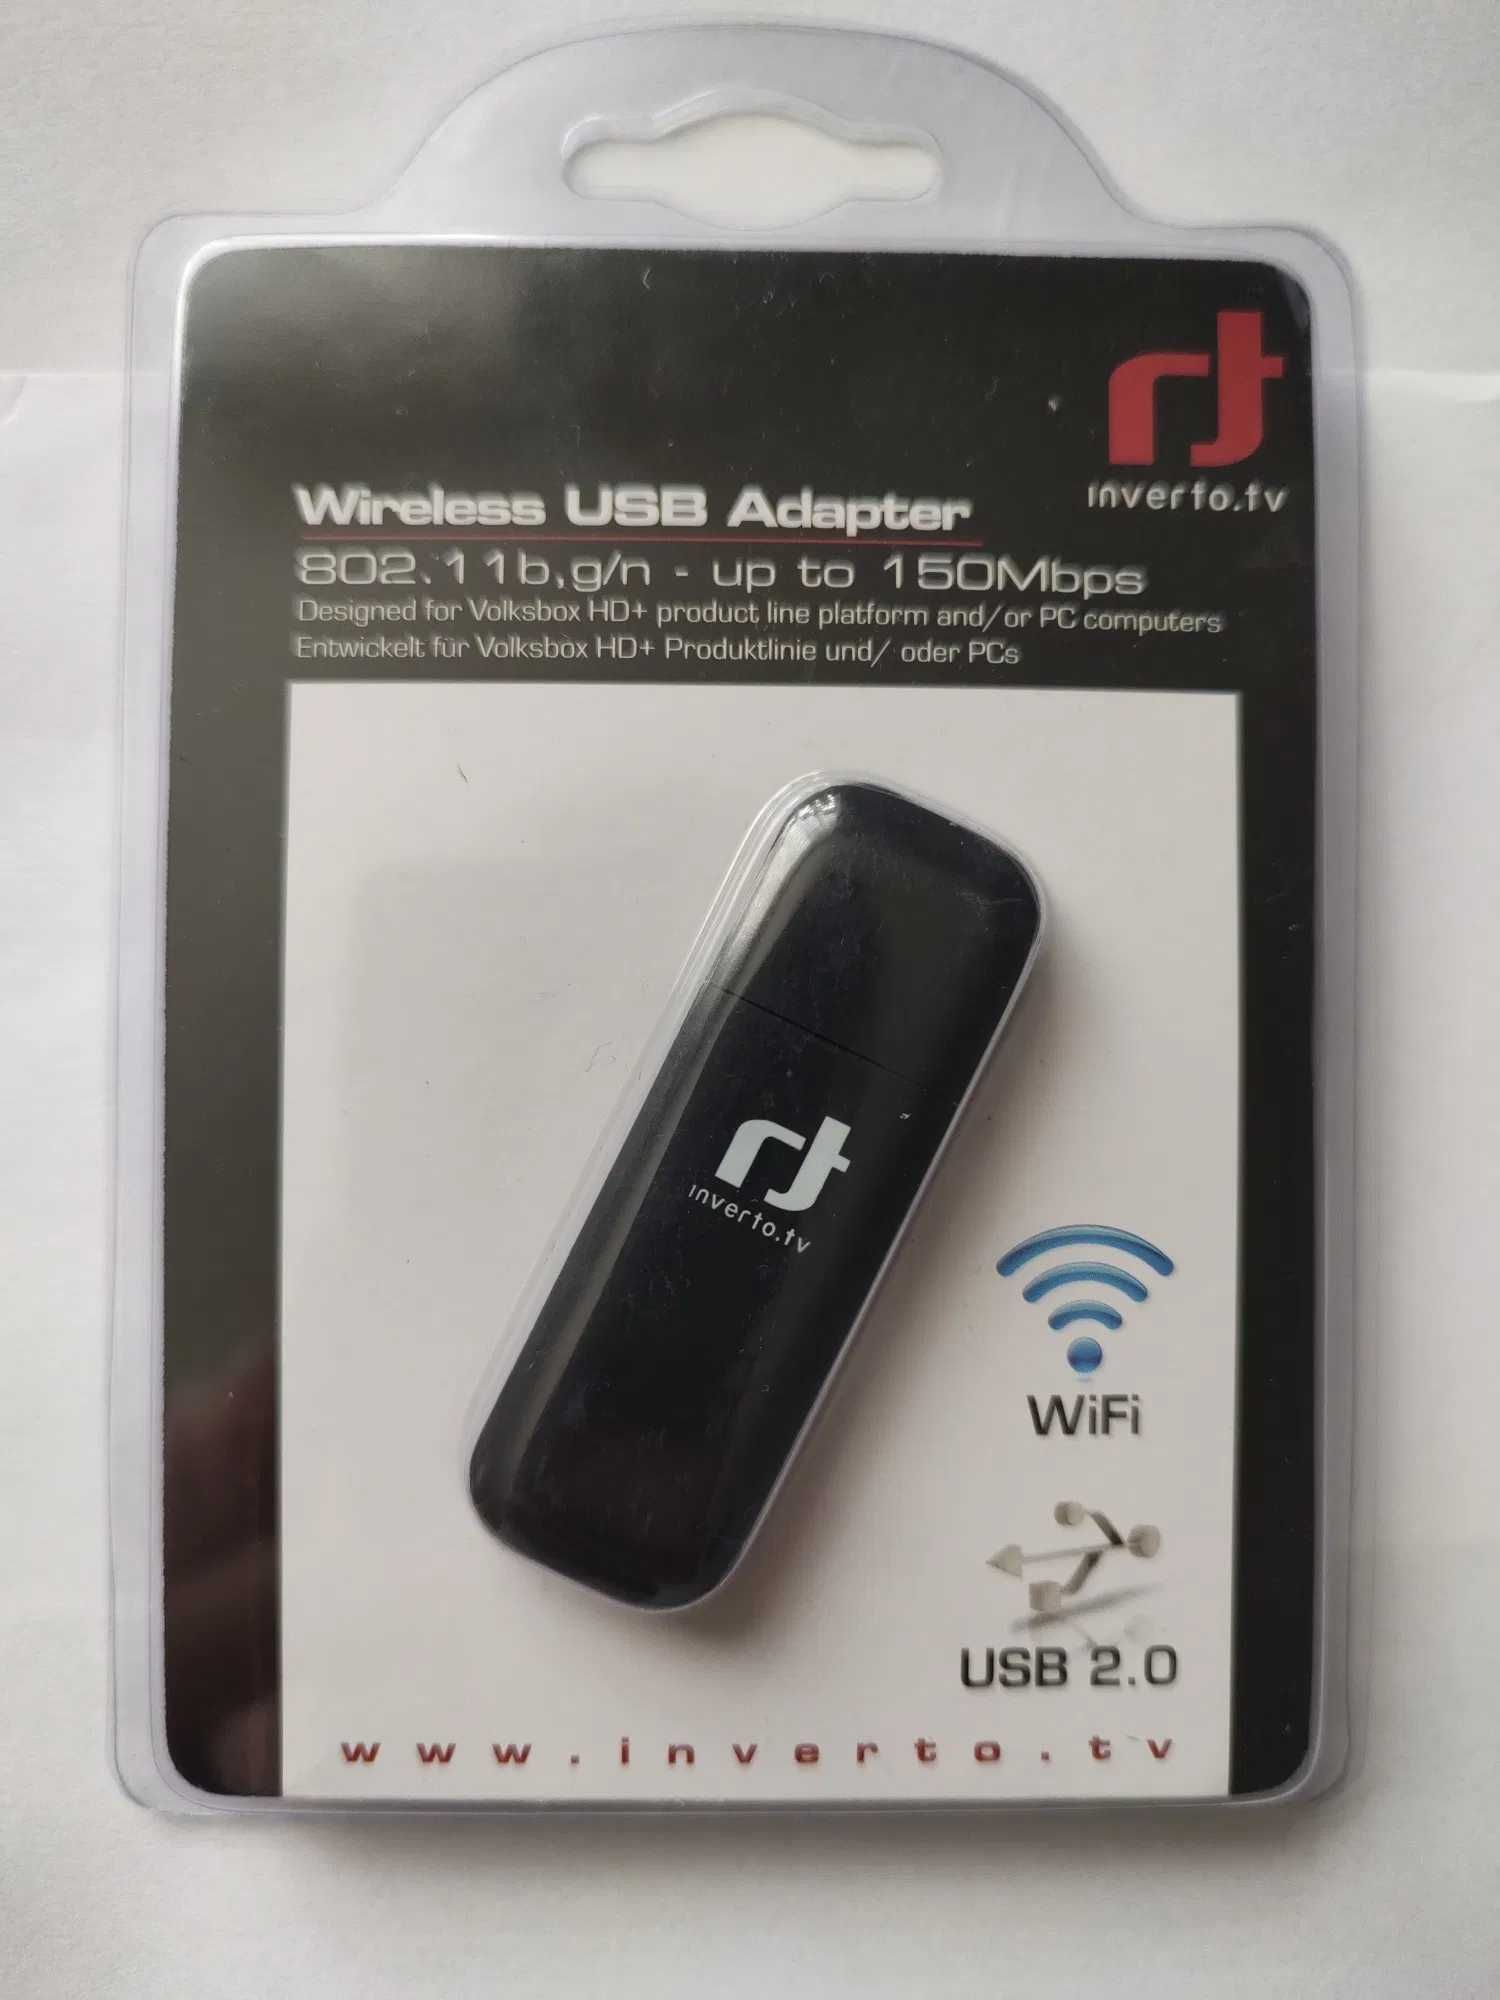 Inverto Adapter USB 2.0 WiFi 150 MBPS